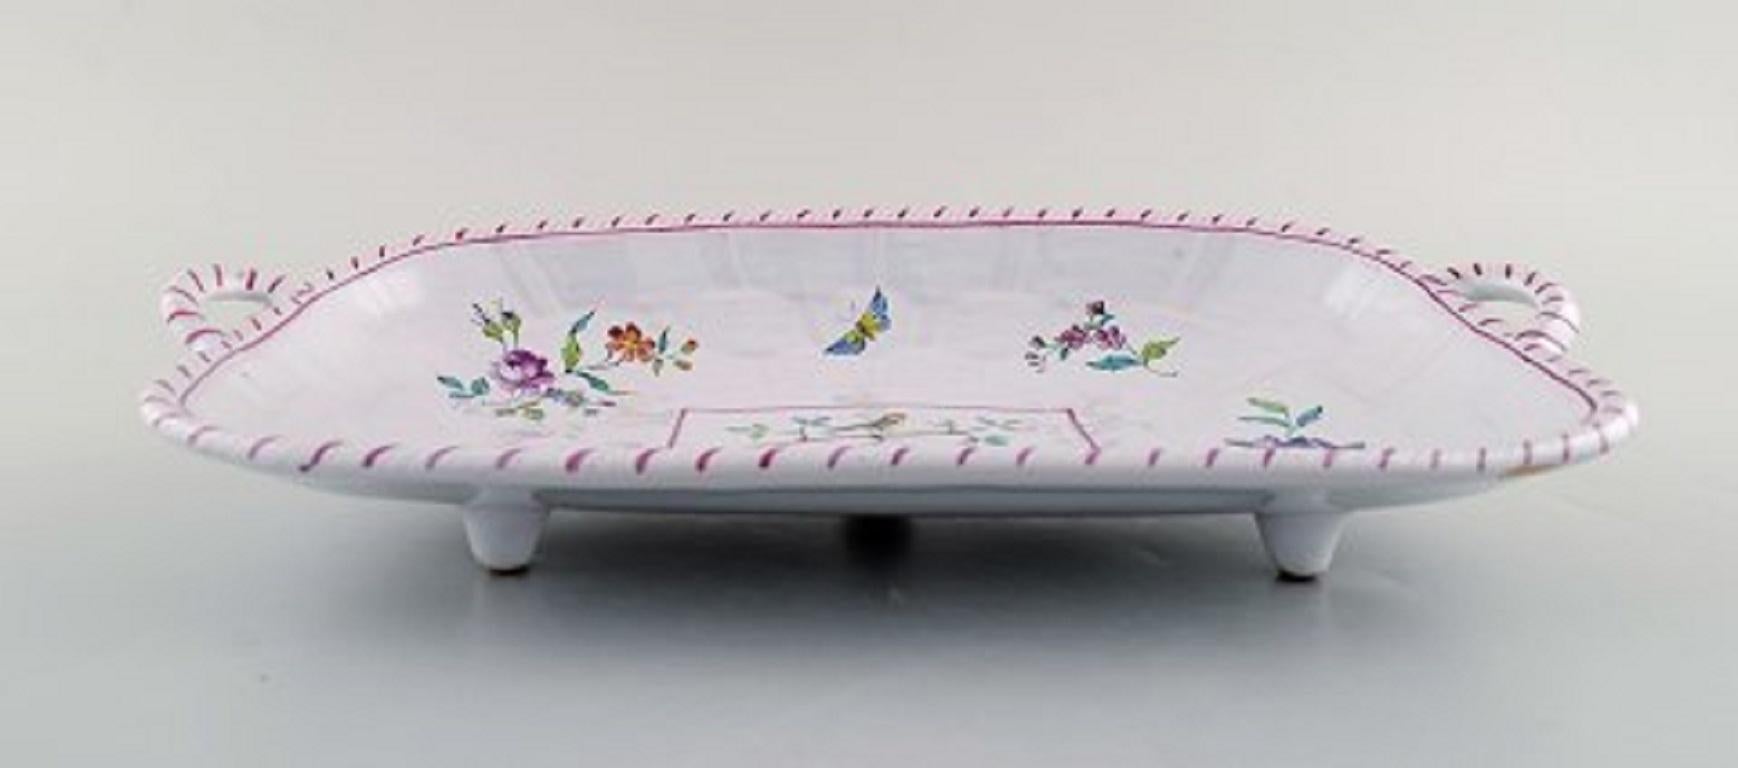 Emile Gallé for St. Clement. Dish on four feet in hand painted faience. Decorated with flowers and birds, 1870s.
In very good condition.
Signed.
Measures: 30.5 x 15.5 x 6.5 cm.